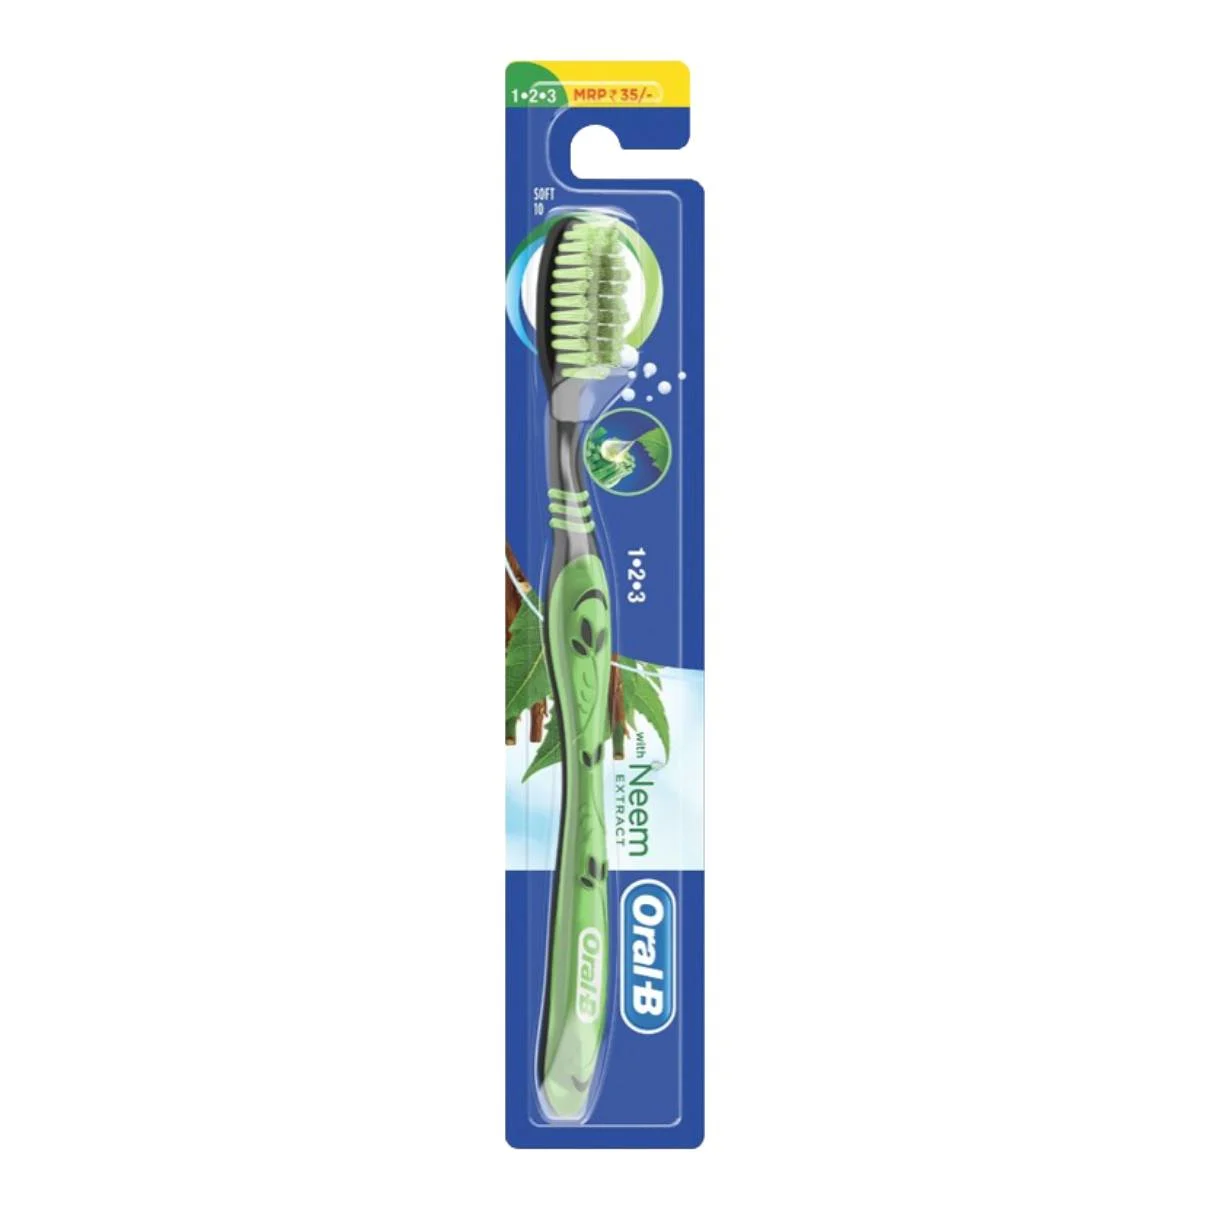 Oral-B 123 Manual Toothbrush With Neem Extract 